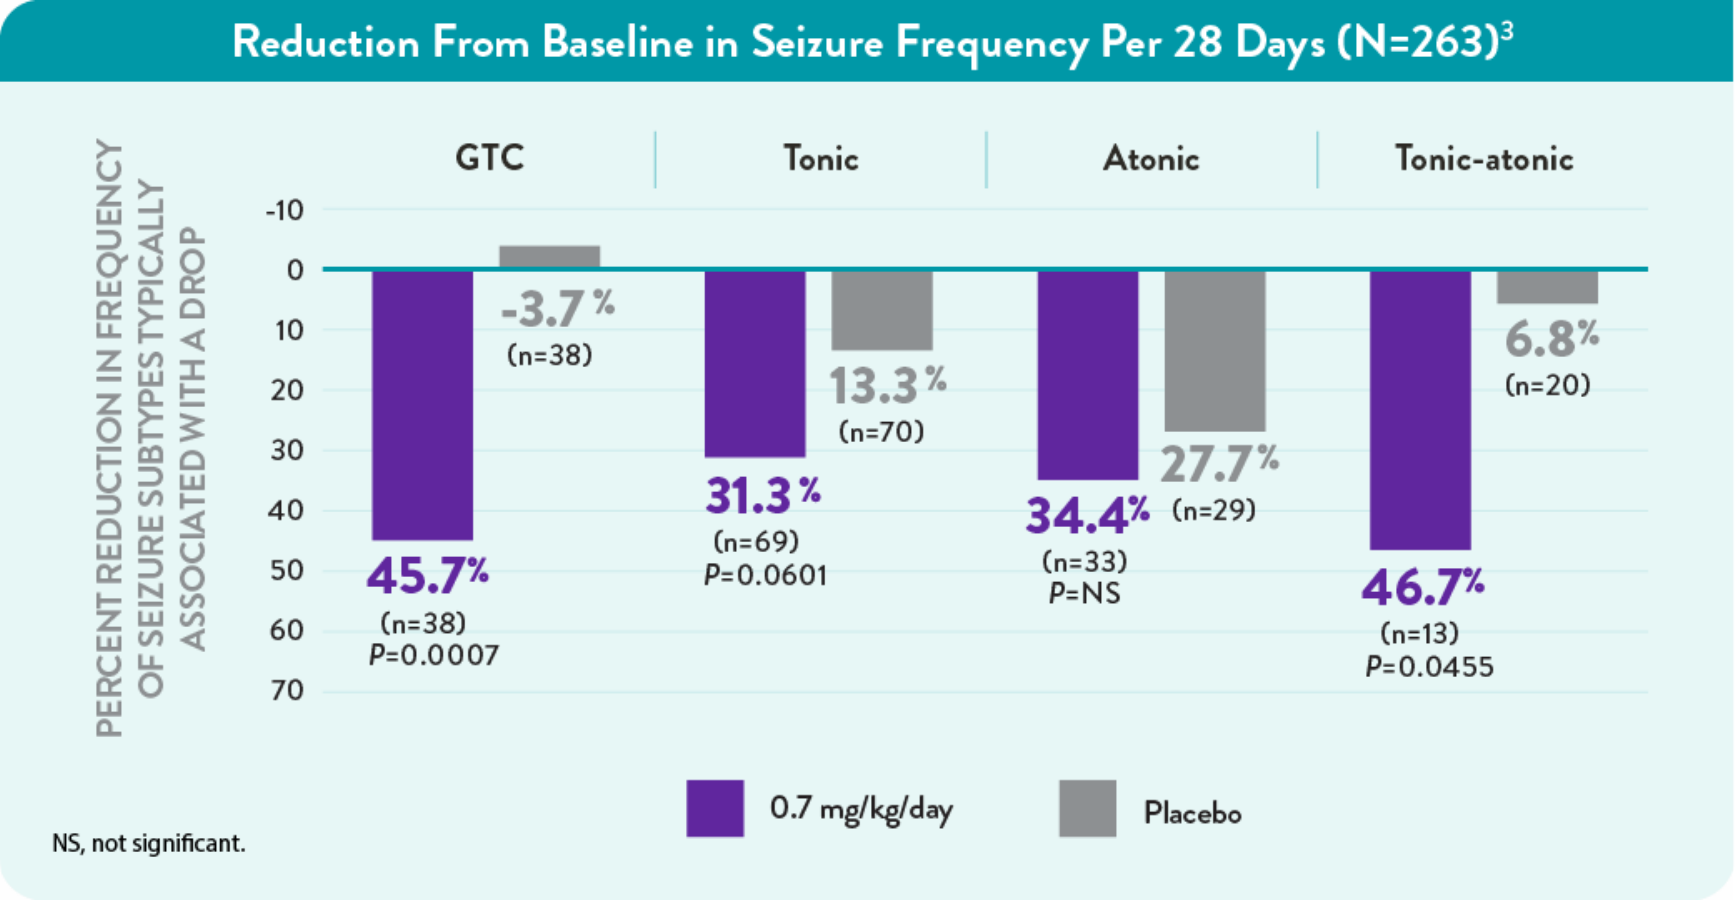 Graph showing the reduction from baseline in seizure frequency per 28 days in patients with Lennox-Gastaut syndrome experiencing generalized tonic-clonic, tonic, atonic, or tonic-atonic seizures.